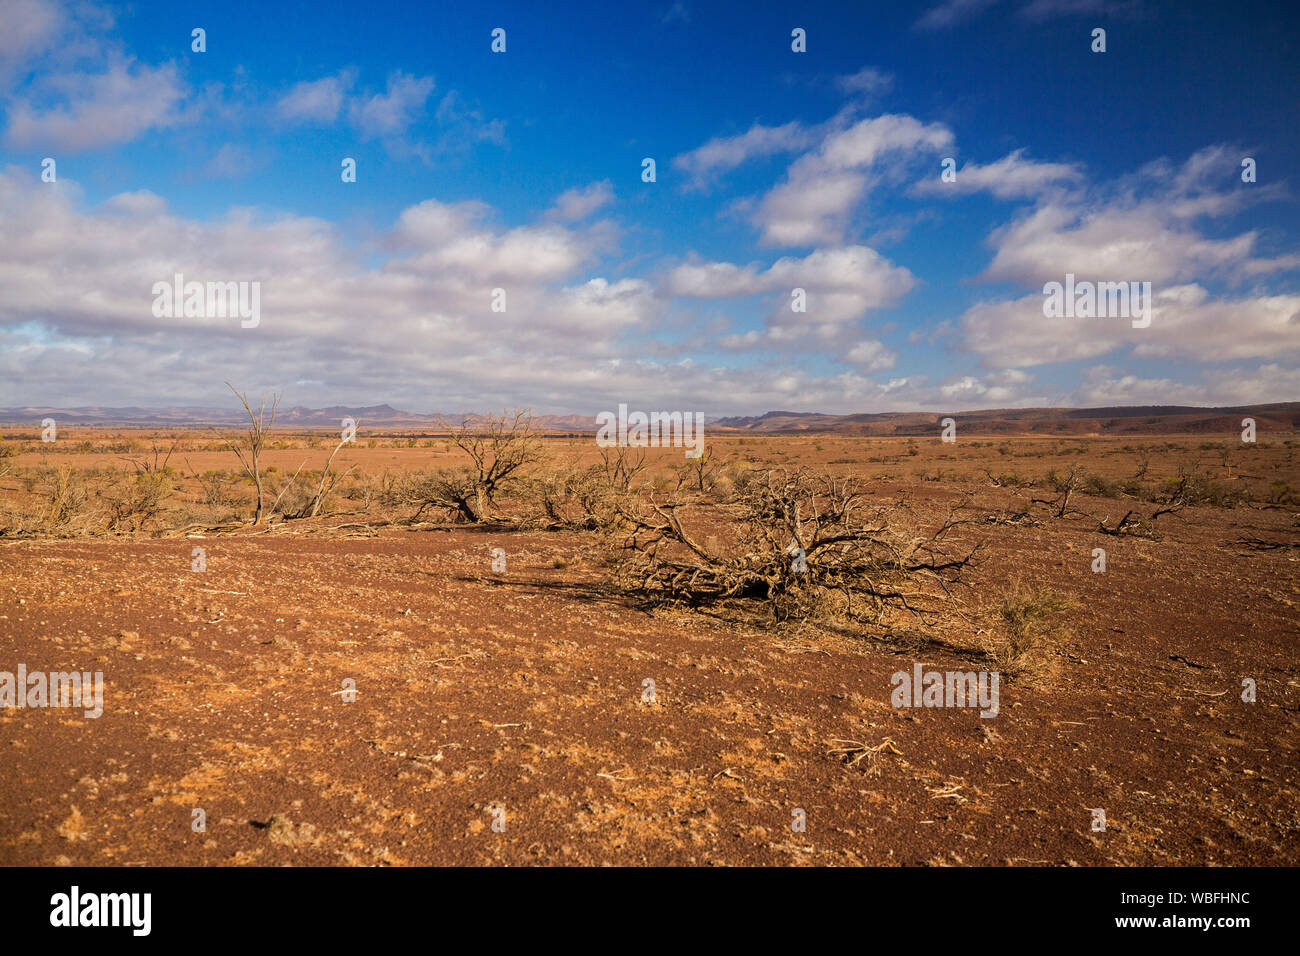 Arid Australian outback landscape with barren red soil of plains, remains of dead trees during drought, and Flinders Ranges in distance under blue sky Stock Photo